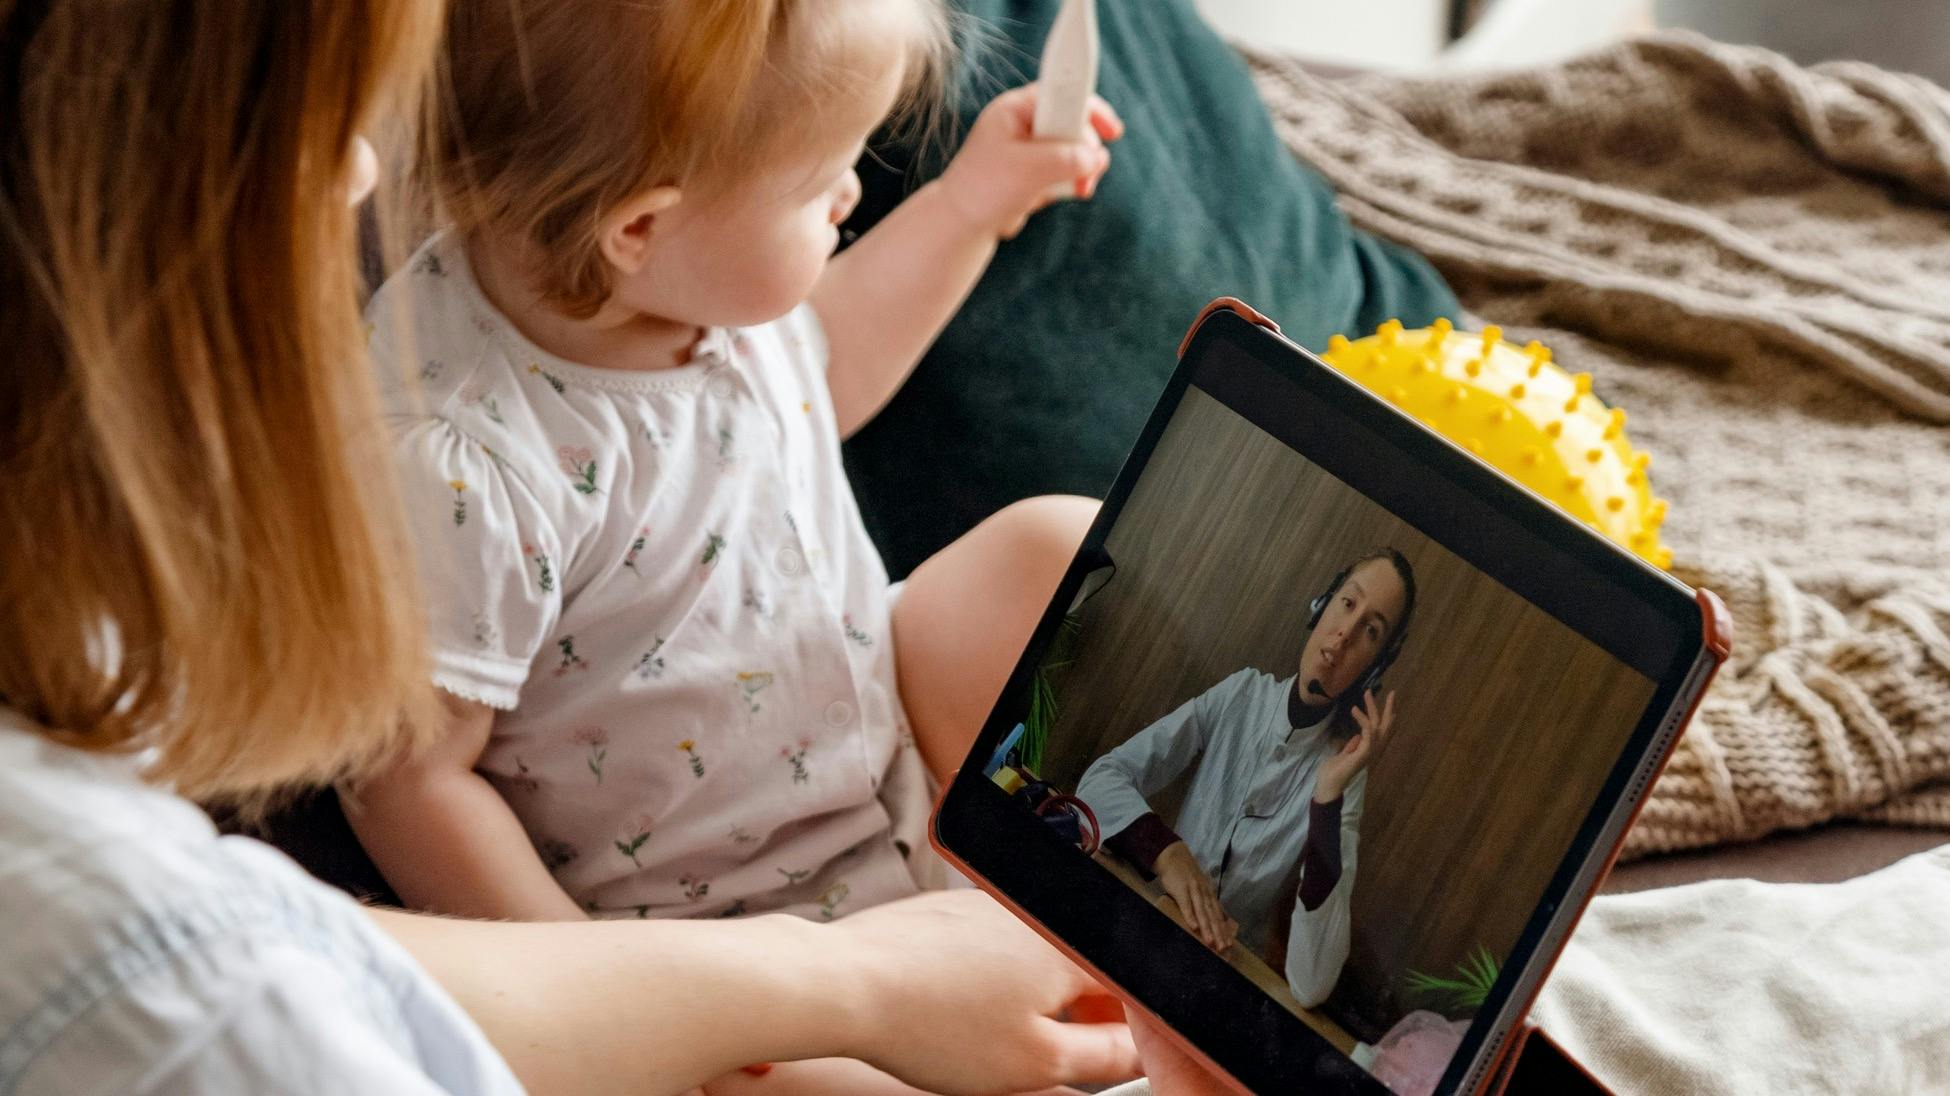 Woman using telehealth on her tablet next to baby